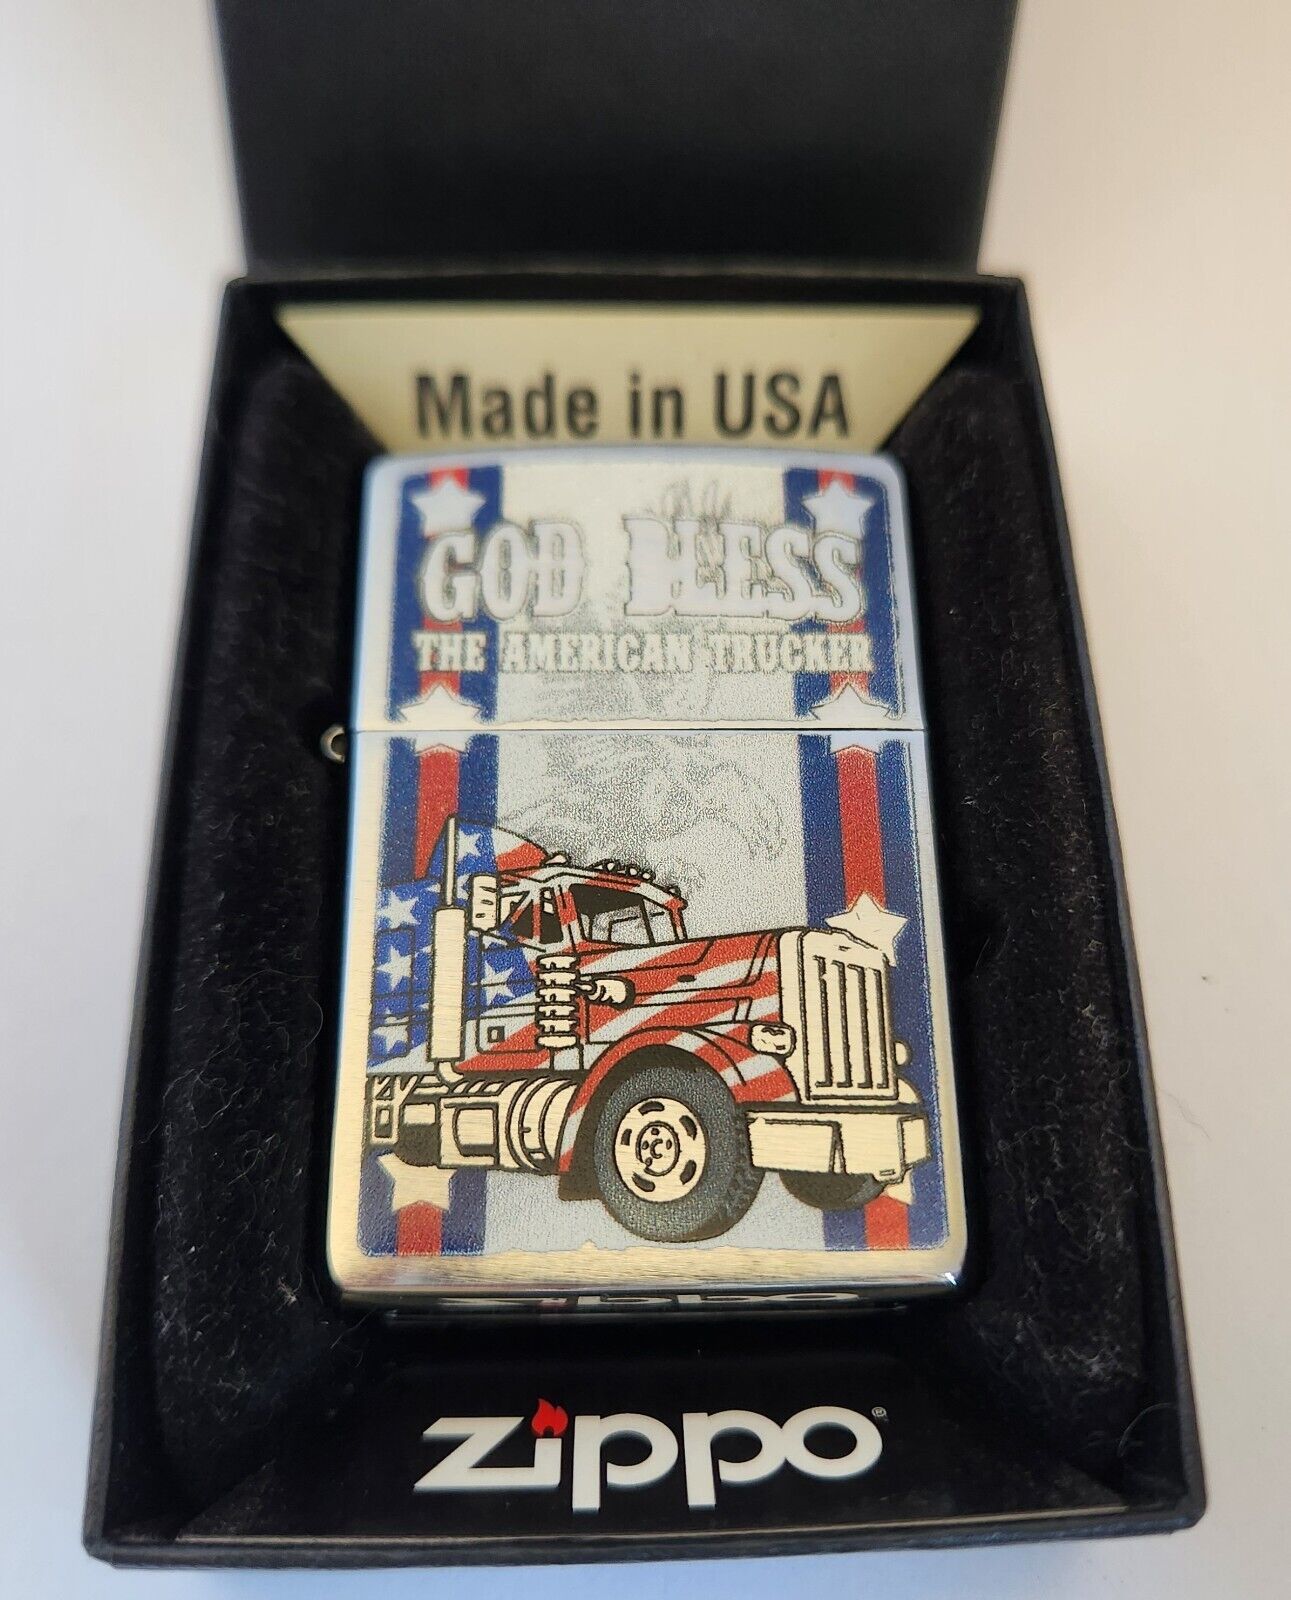 ZIPPO Lighter God Bless American Truckers Pre-owned Spark No Light Needs Service